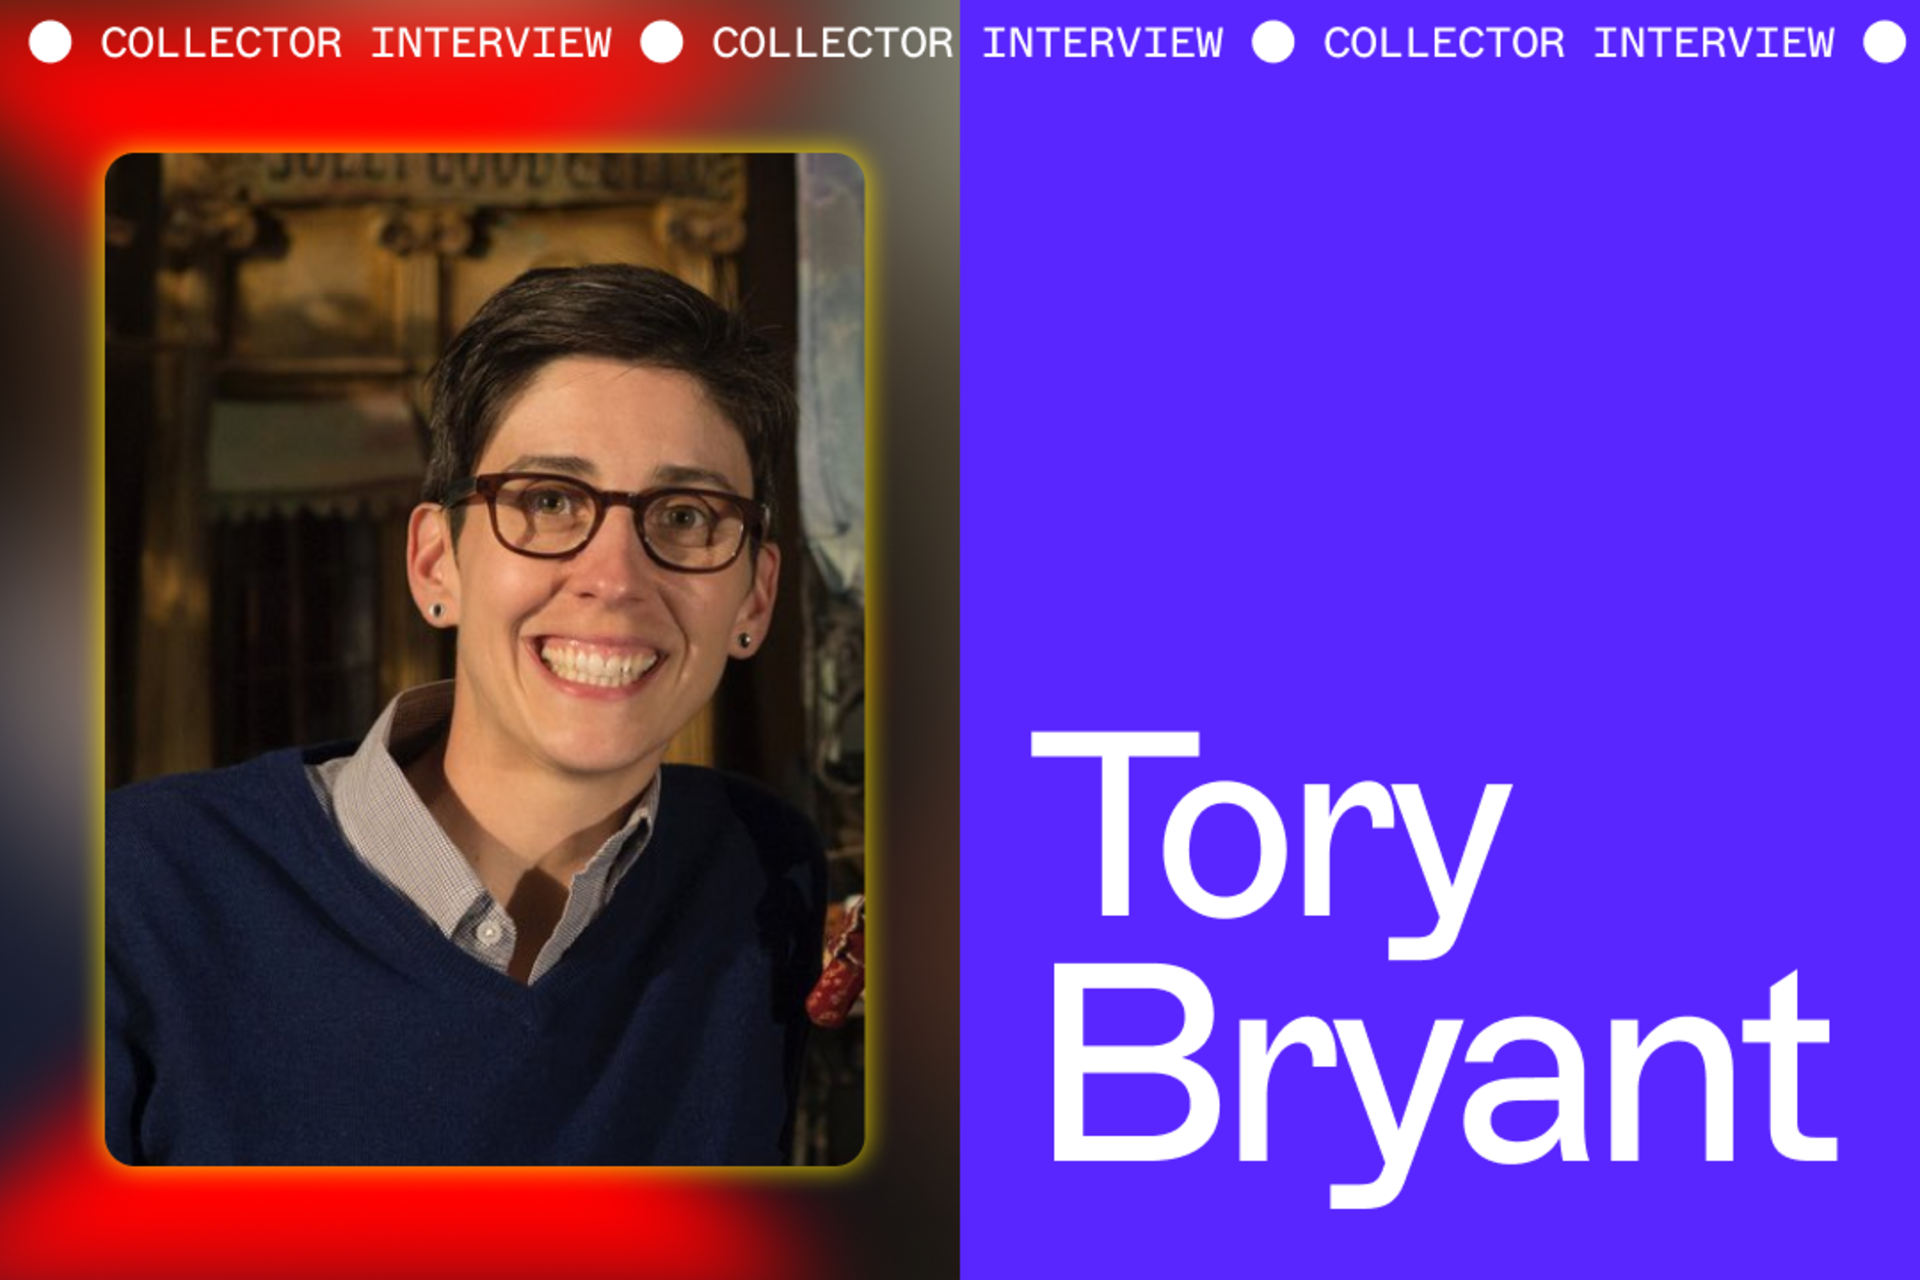 Tory Bryant has an eye for design.